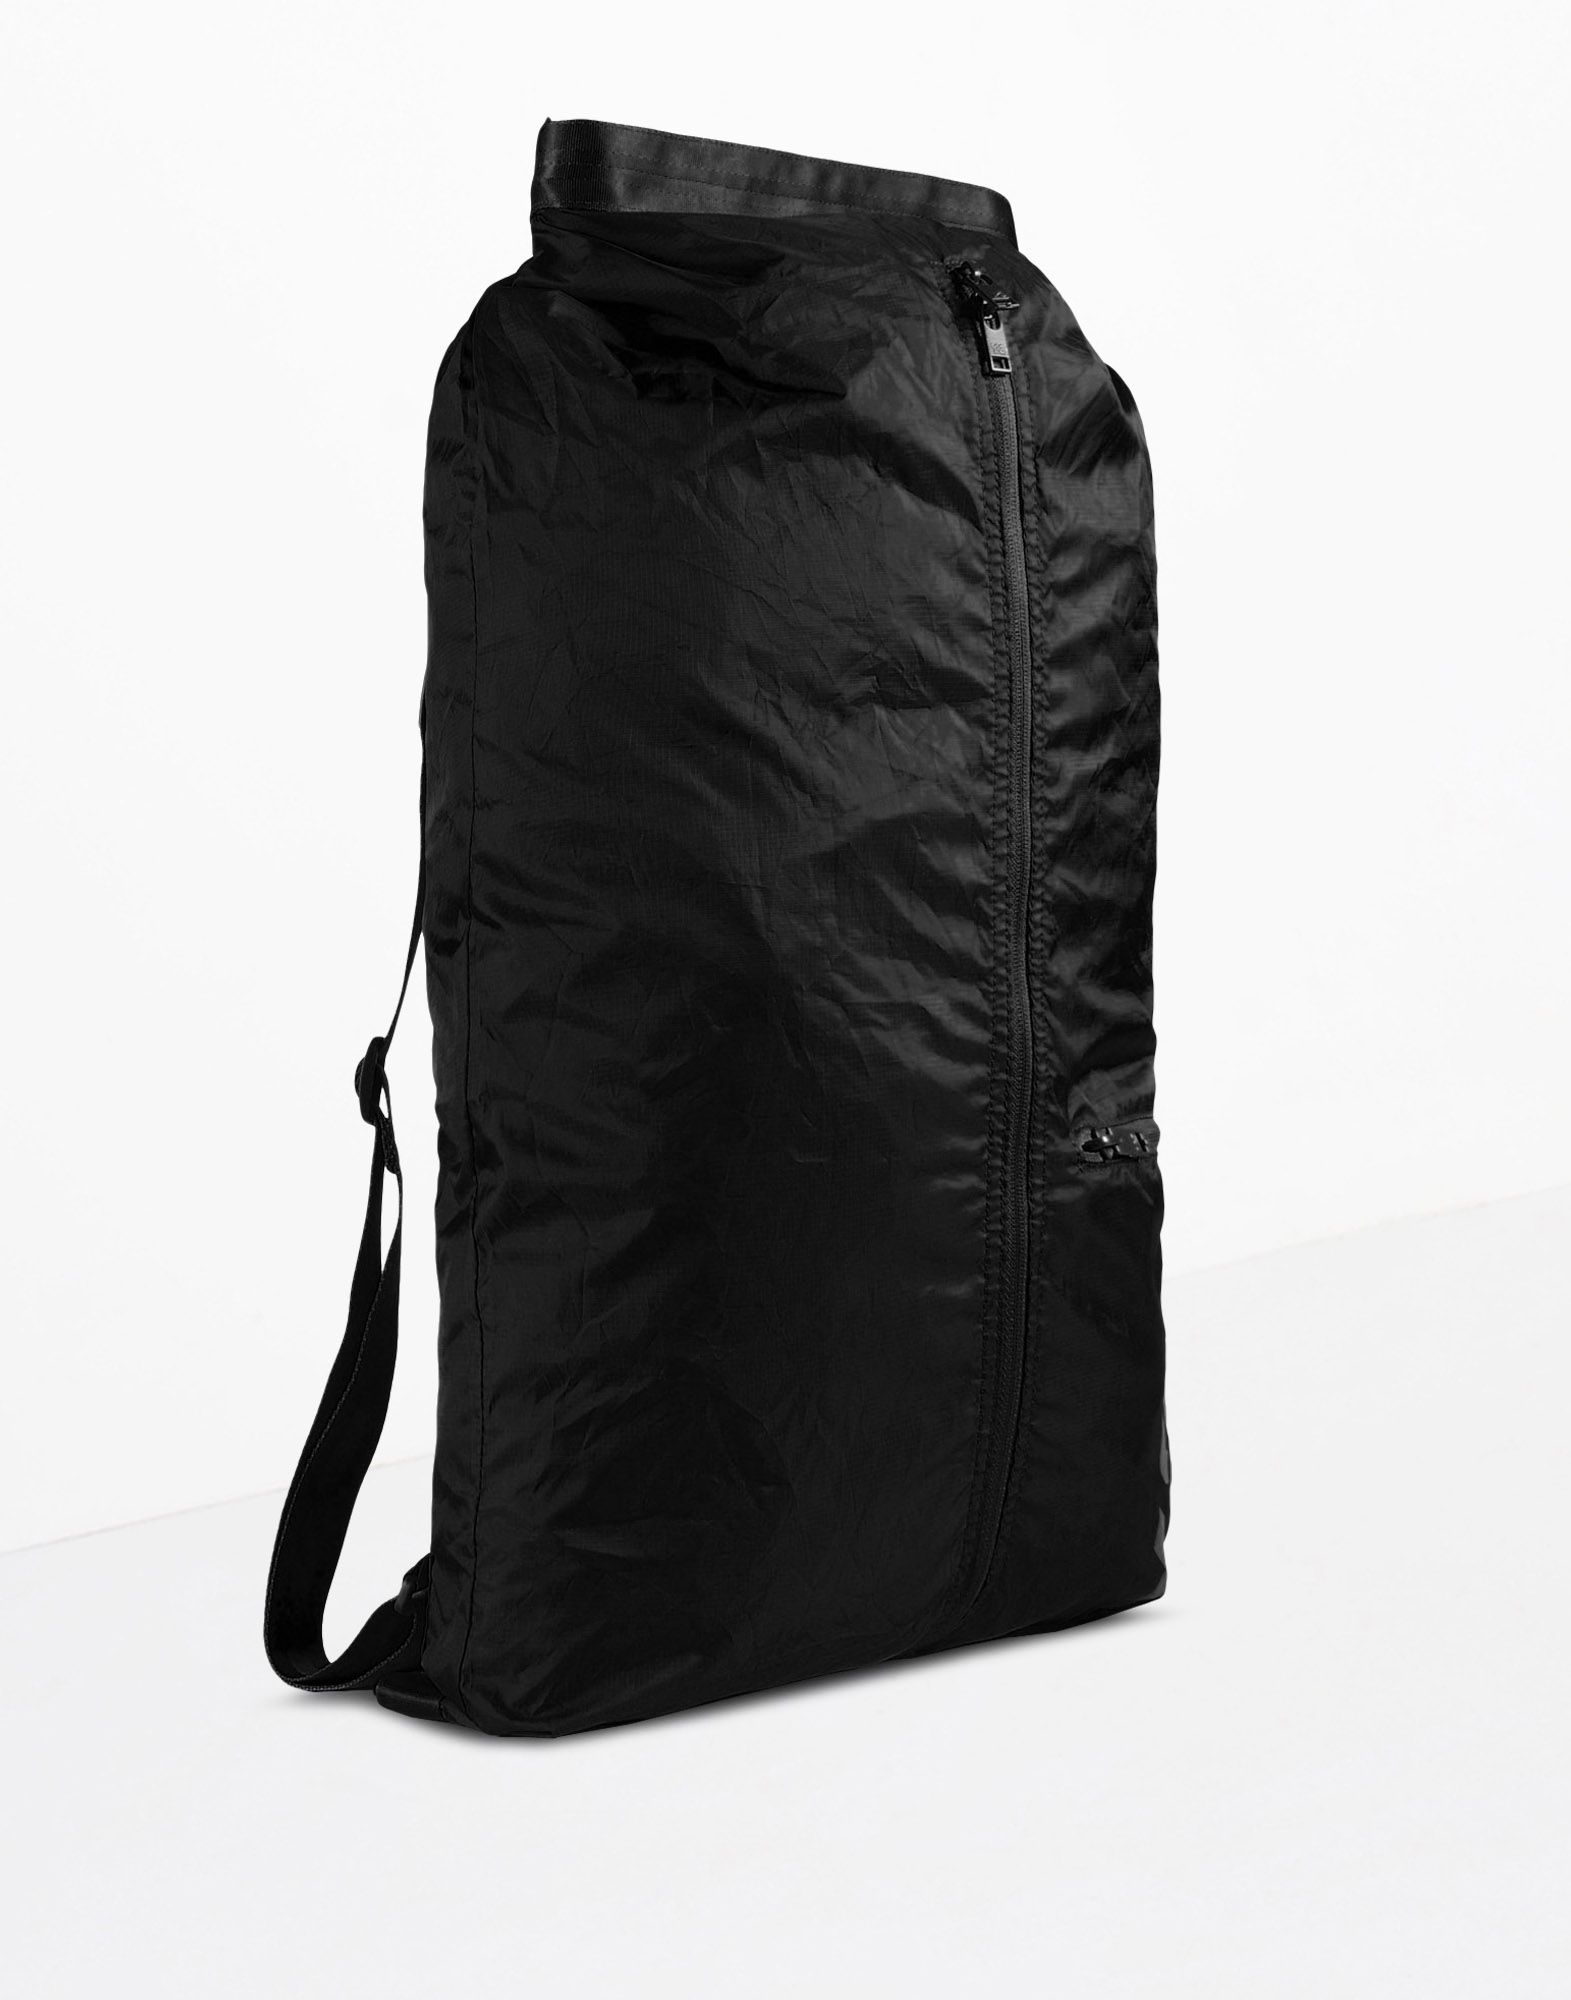 Y 3 PACKABLE BACKPACK for Women | Adidas Y-3 Official Store